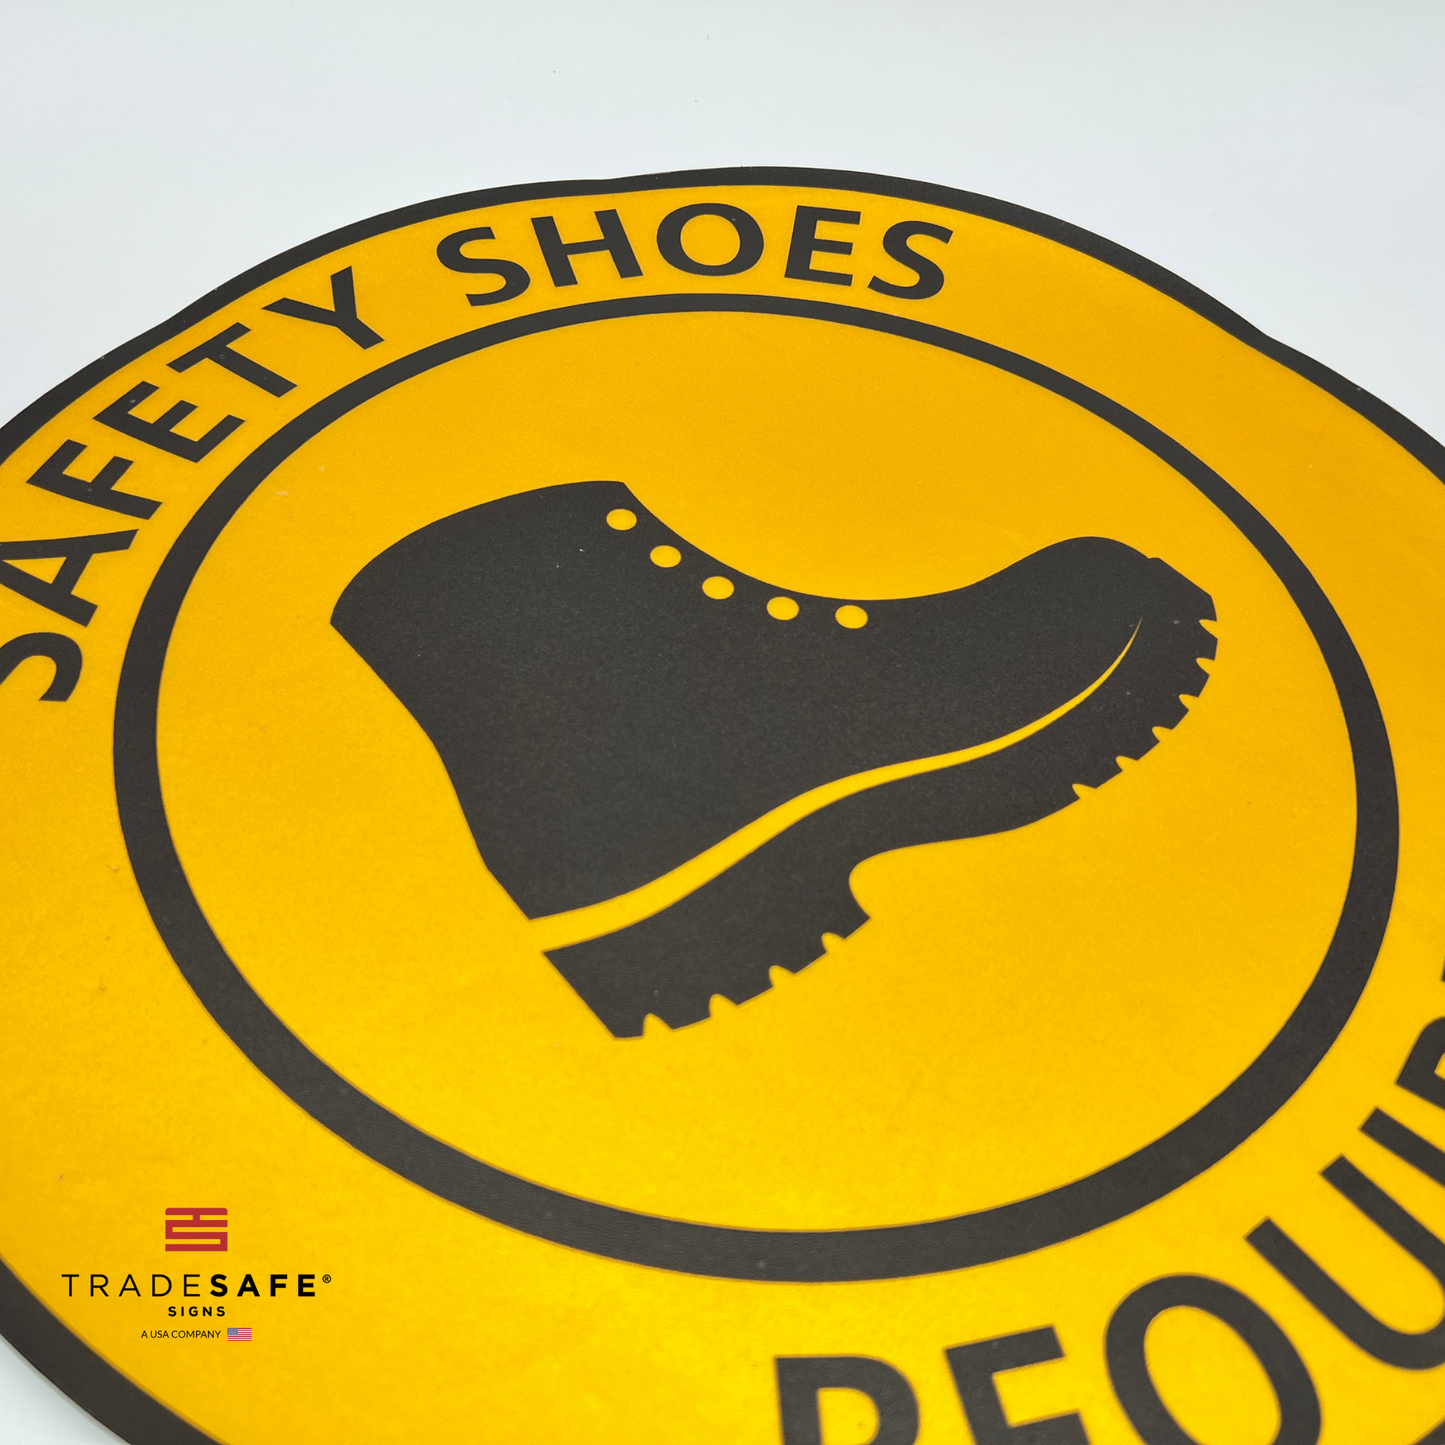 close-up of "safety shoes required" sign